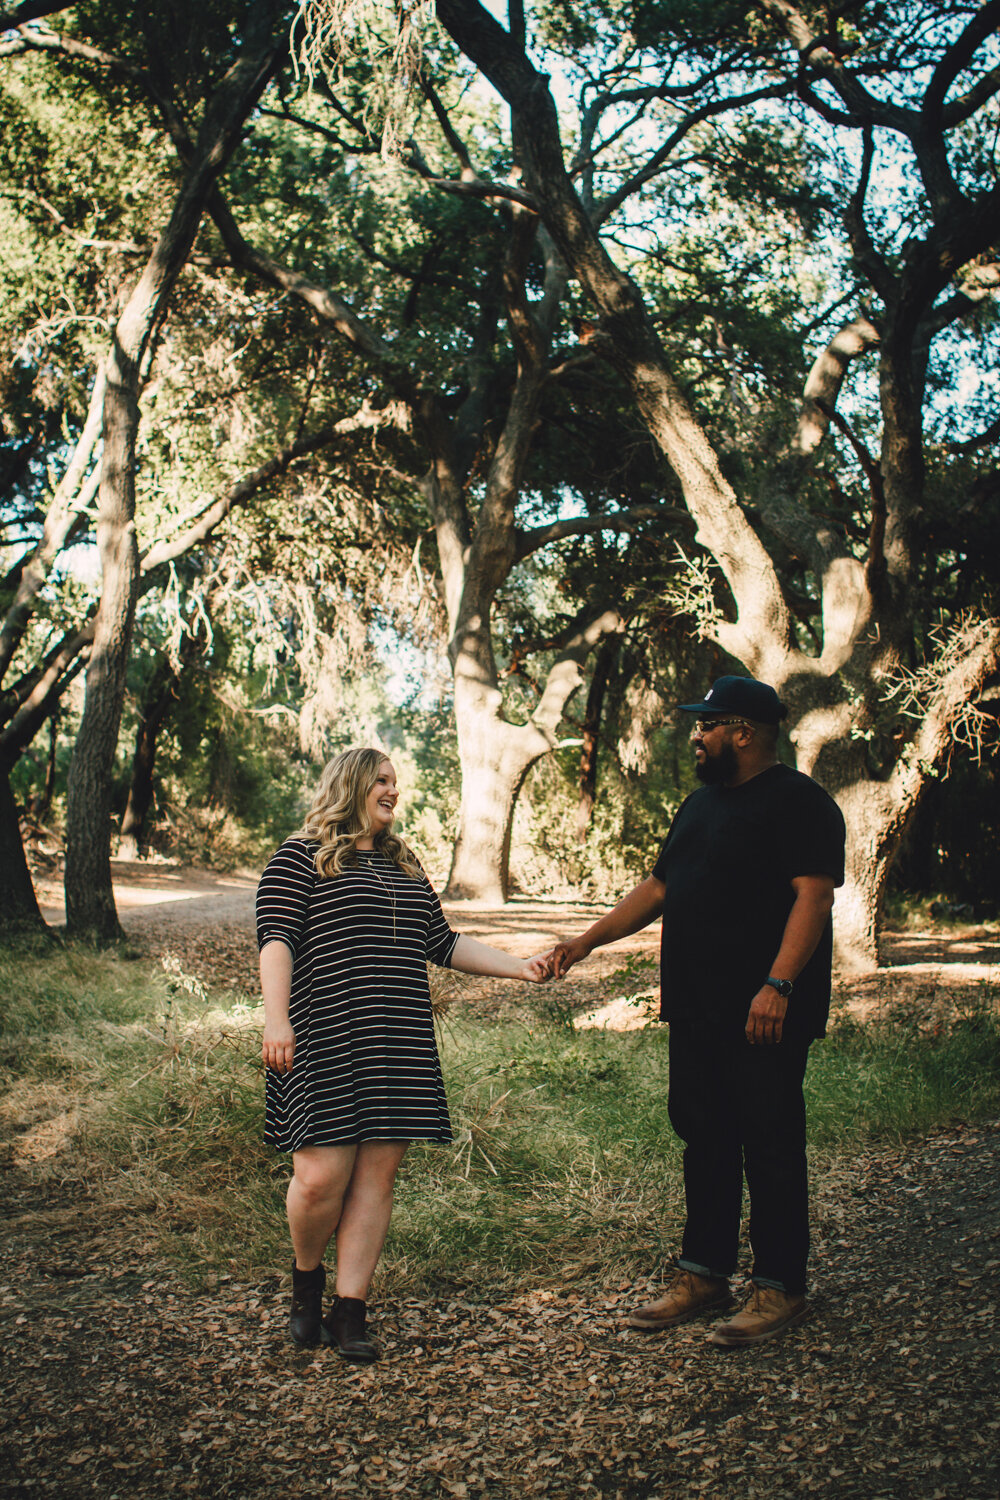 engagement engaged photography photographe marriage wedding photographer corse corsica california desert foothill ranch whiting lifestyle Anza Creative-4.jpg